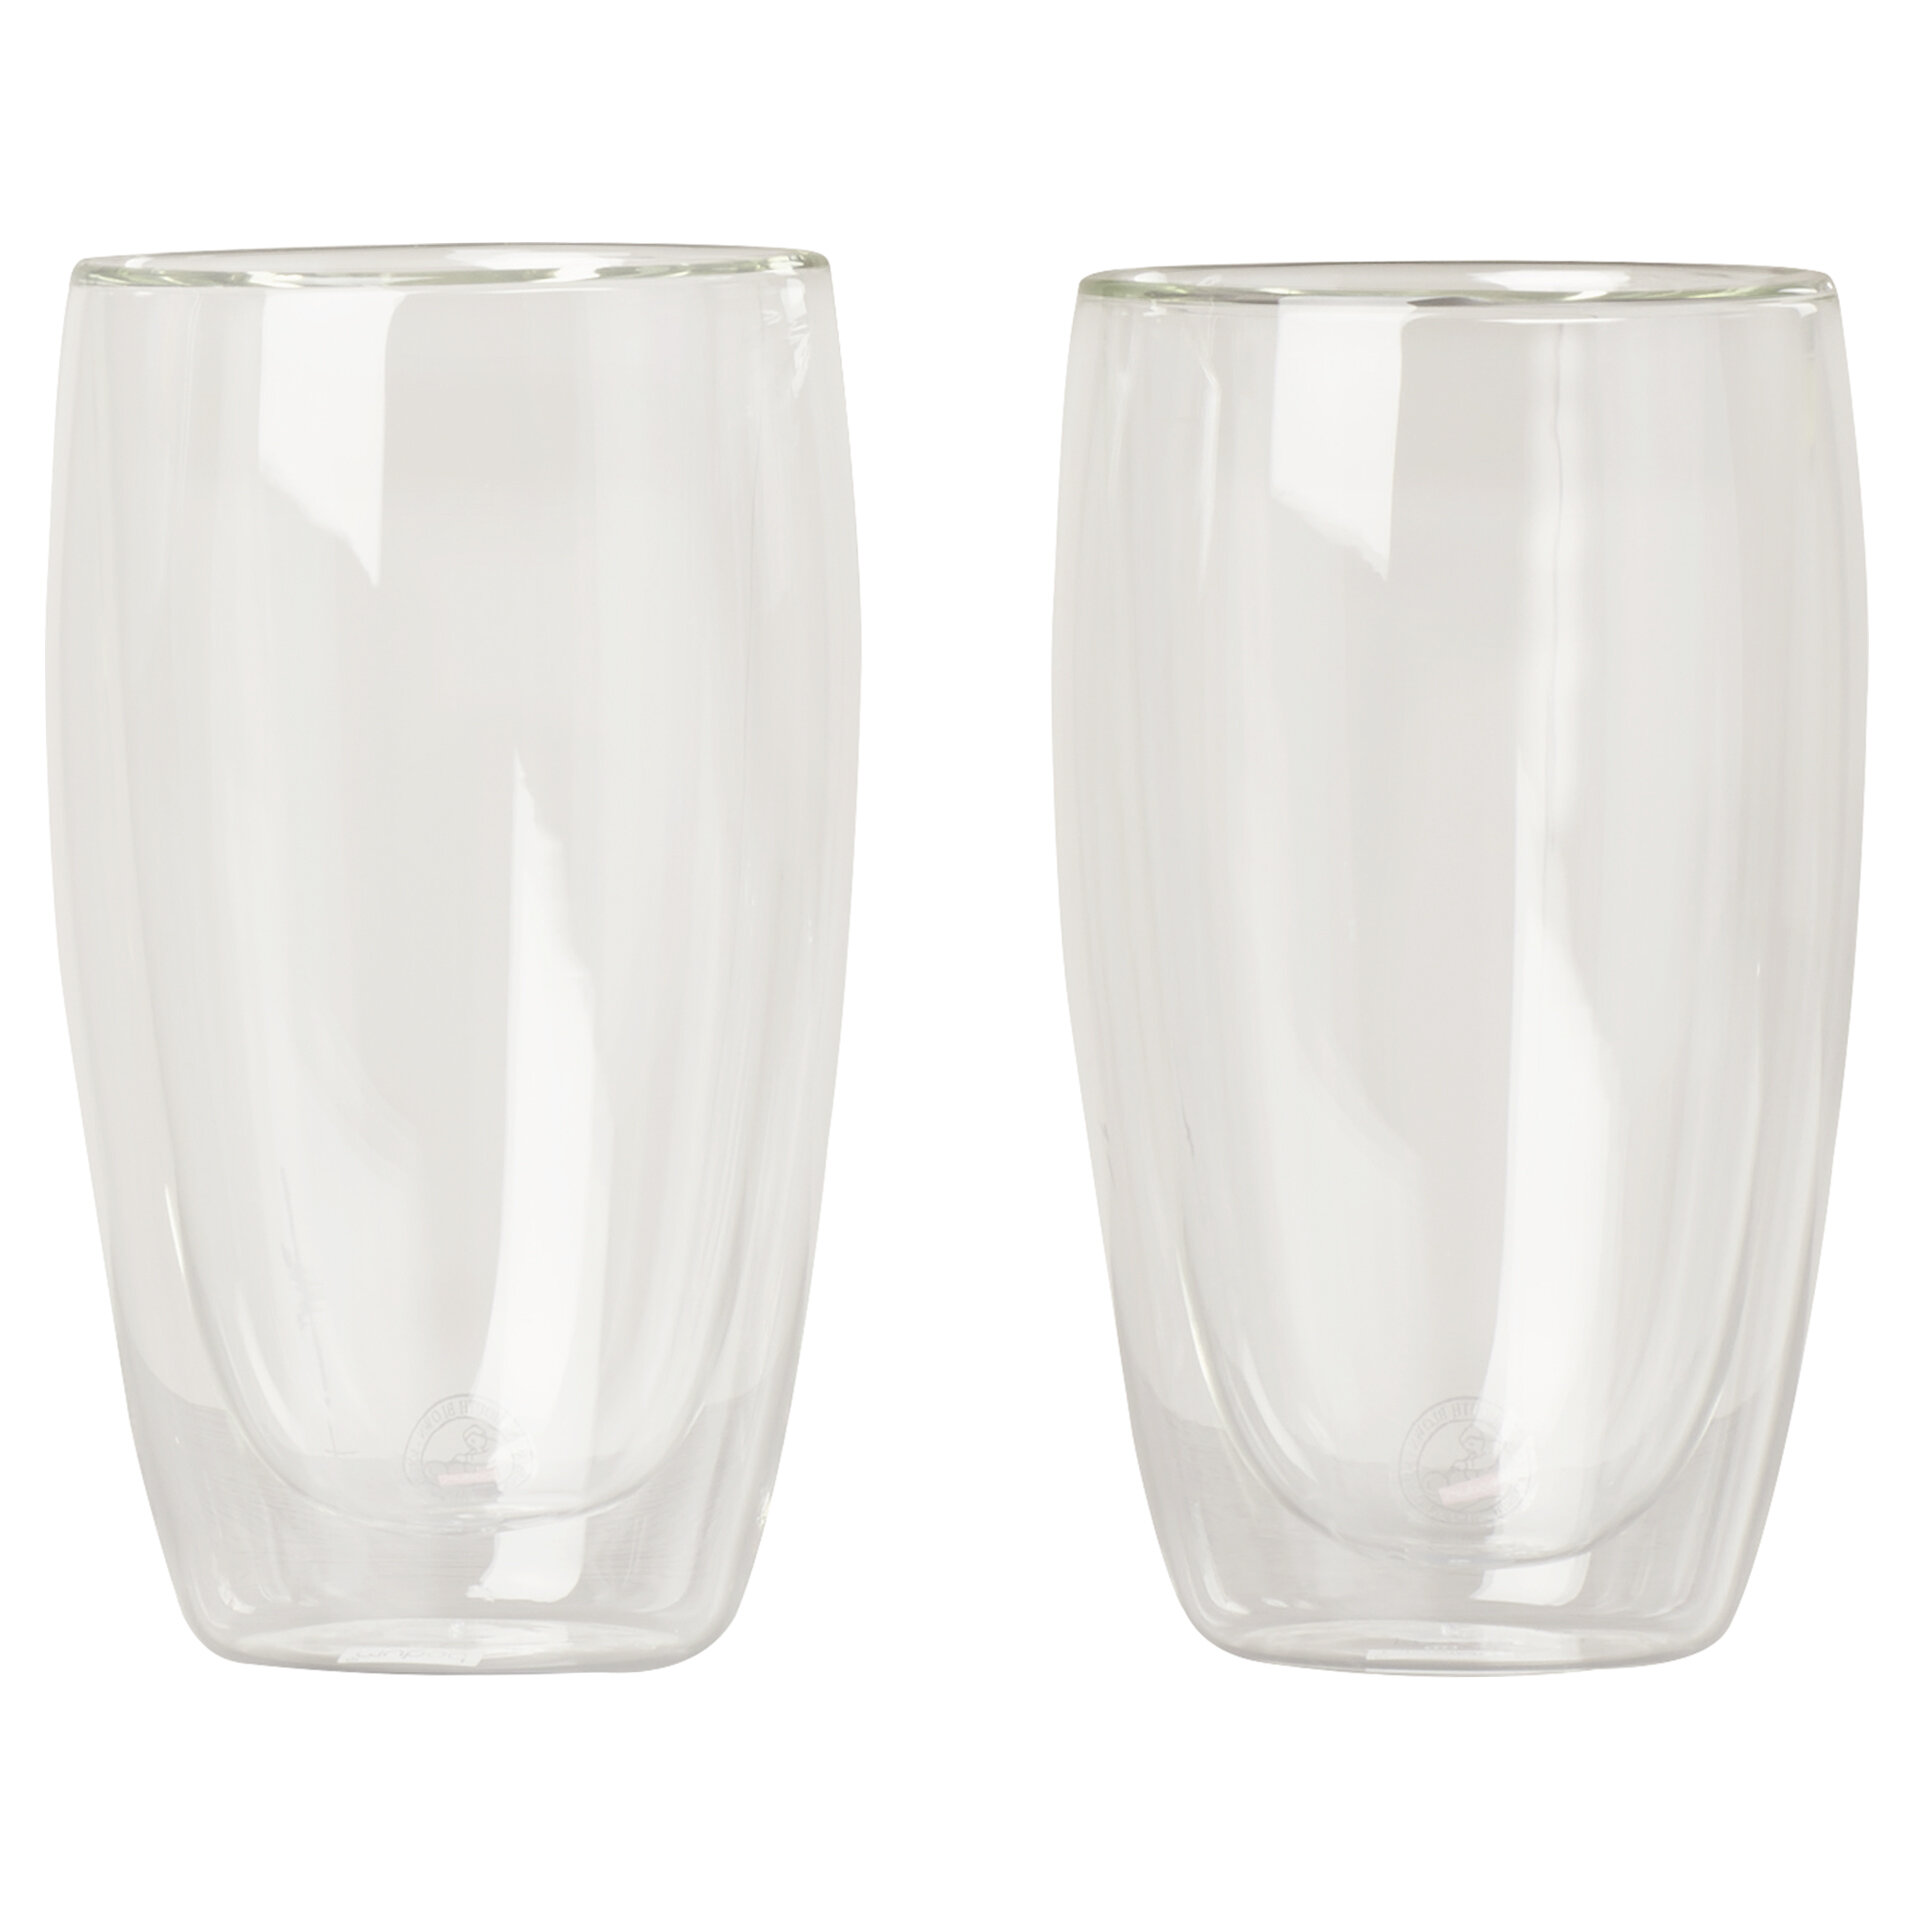 Bodum Double Wall Insulated Drinking Glasses - 12 oz - Set of 2